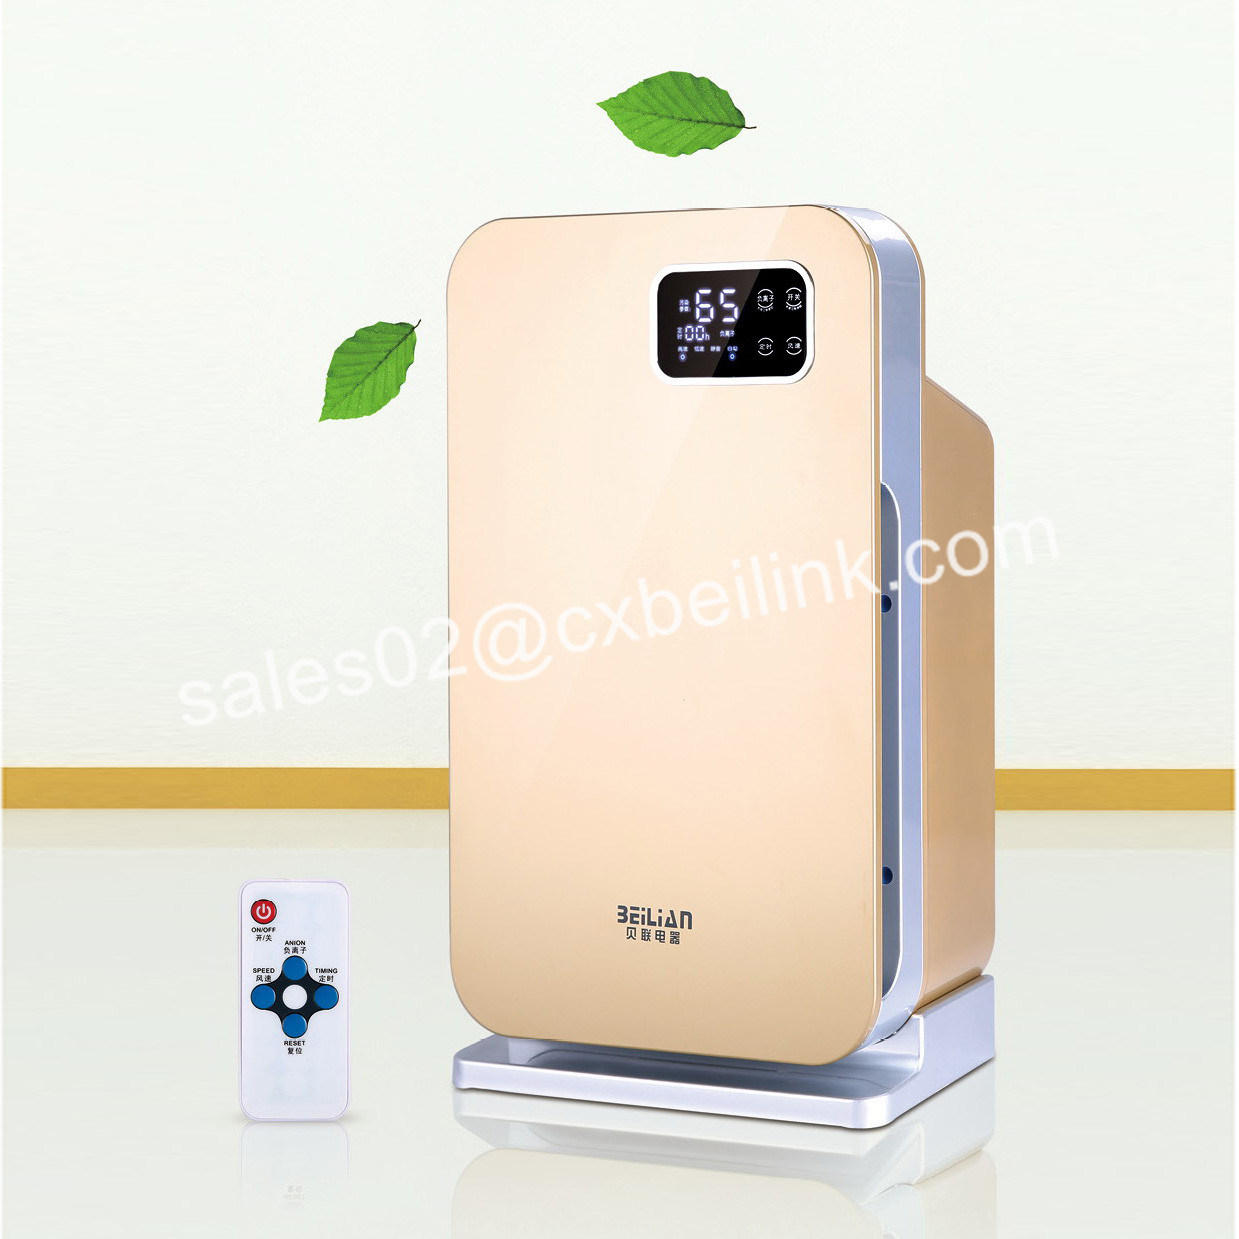 Smart Home Air Purifier, Air Cleaner with LCD Display